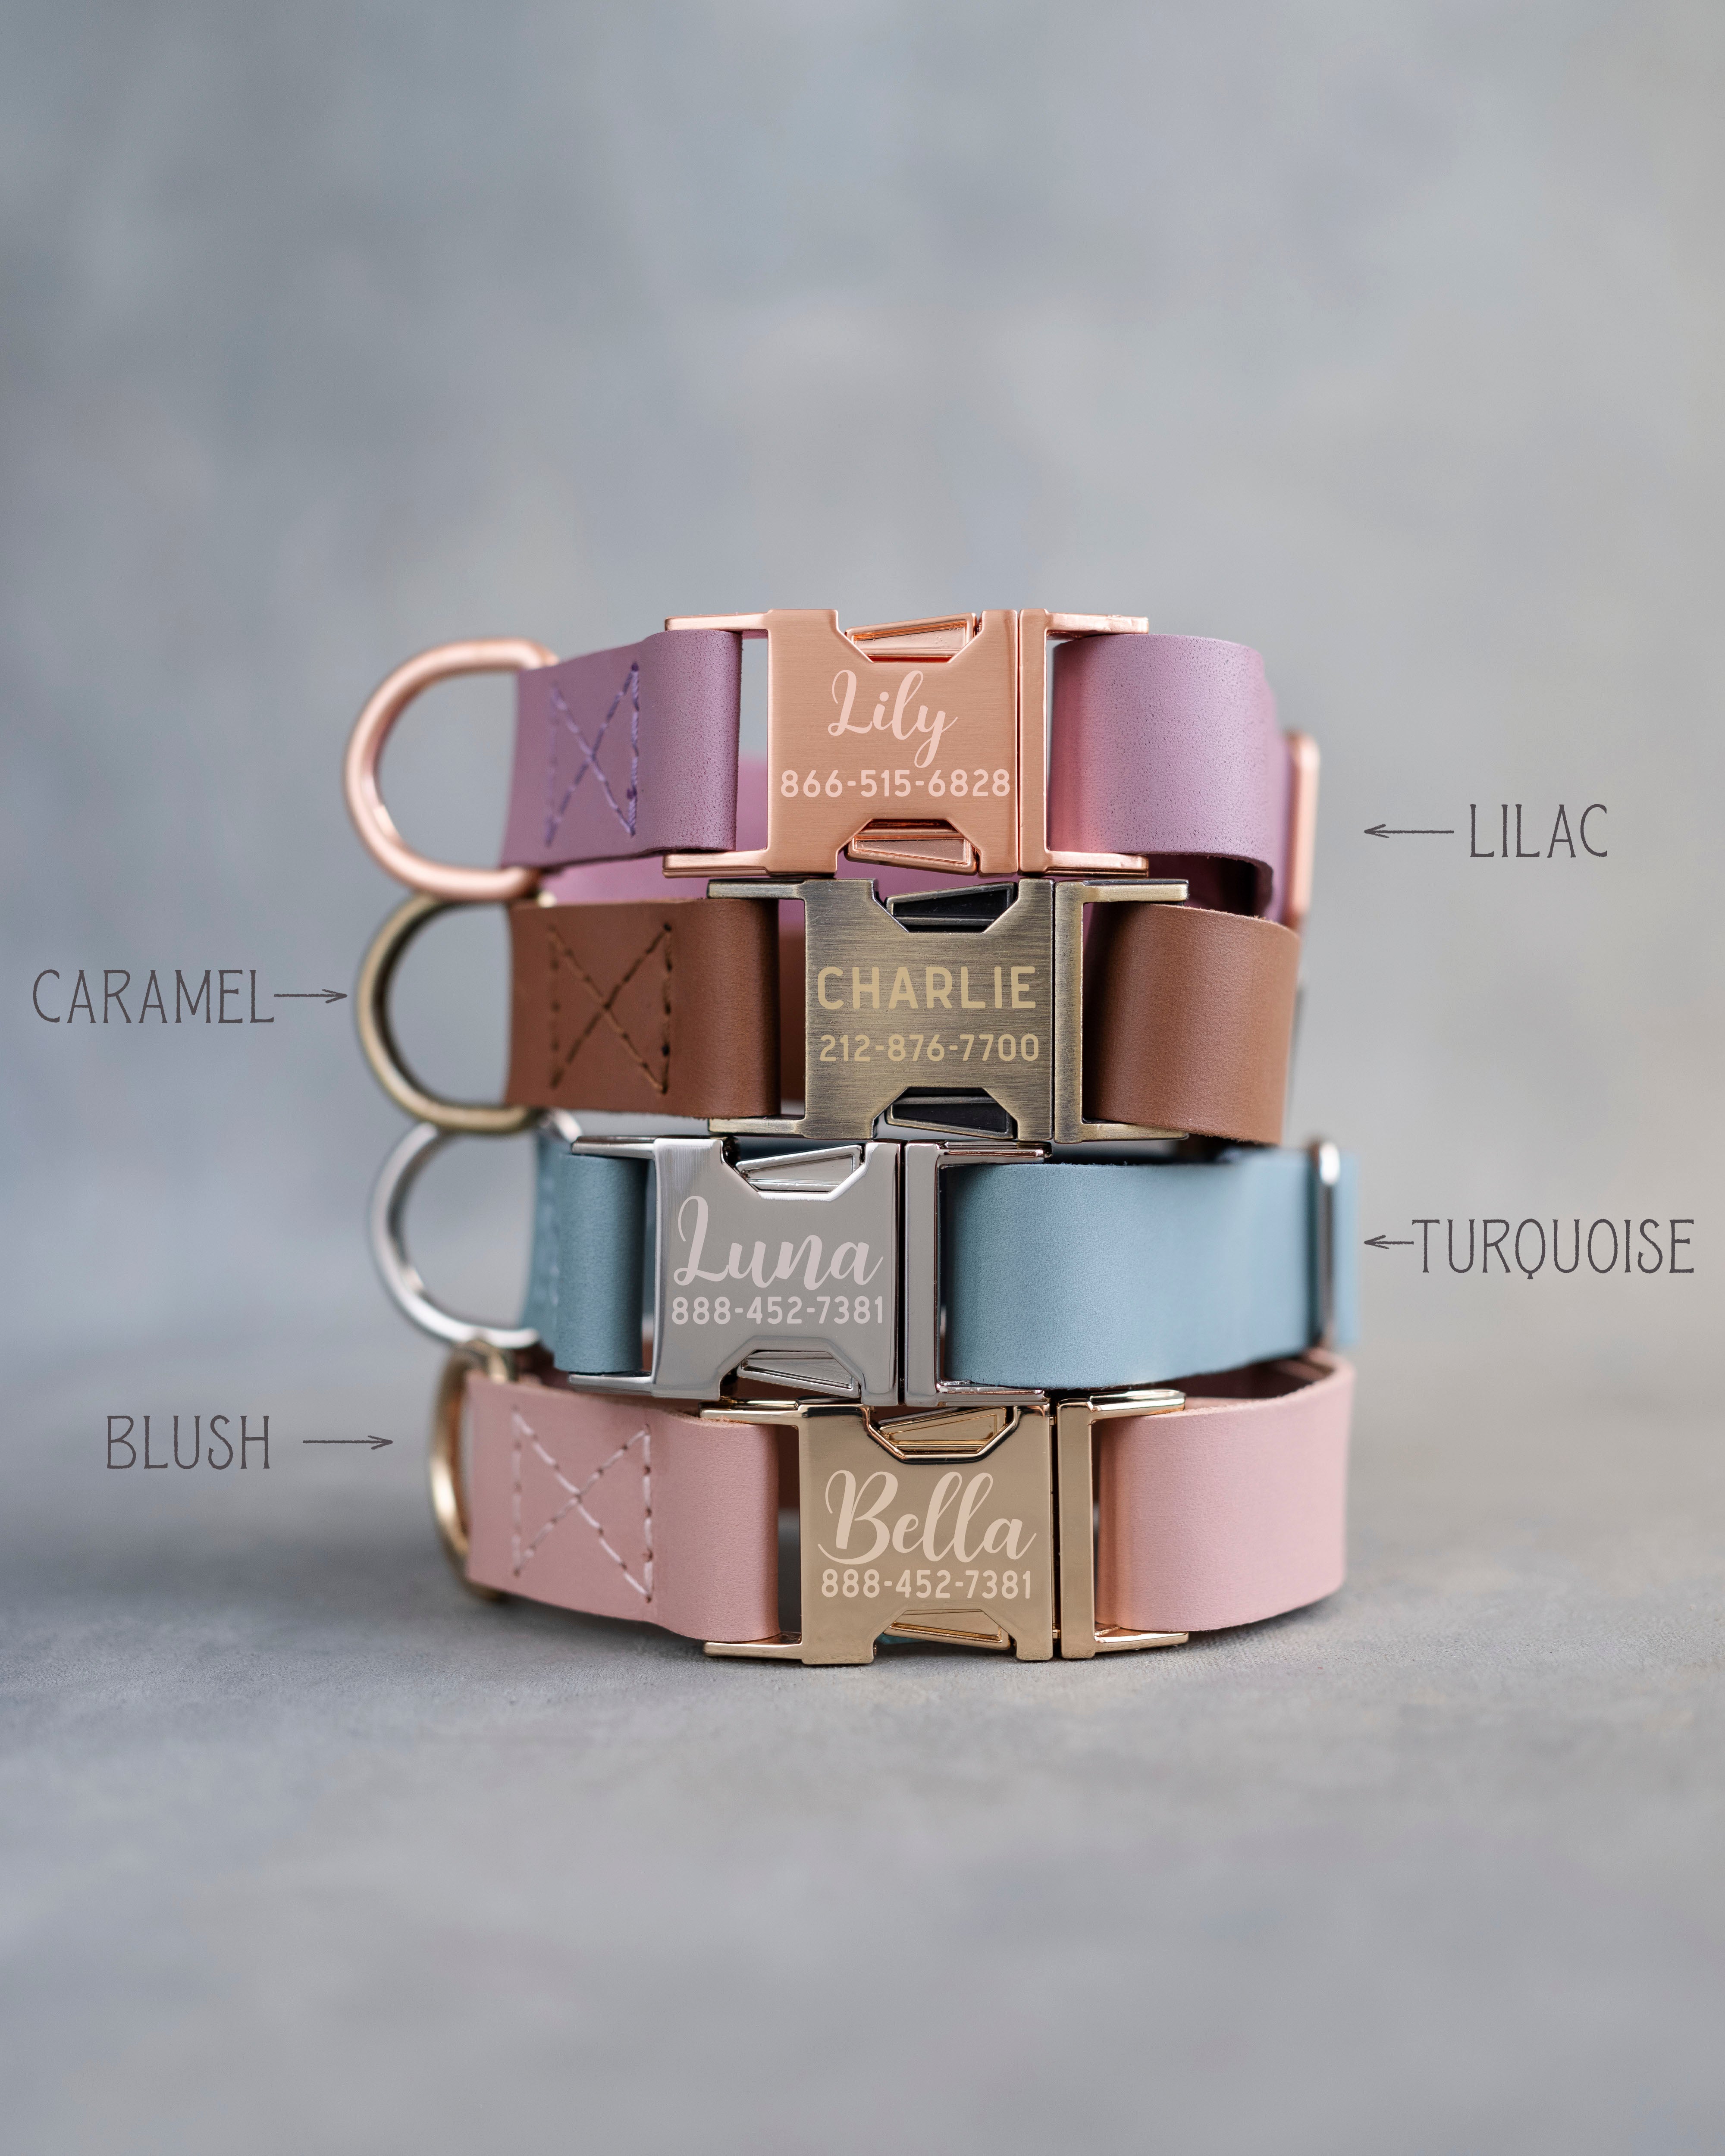 Personalized leather dog collar for small dogs